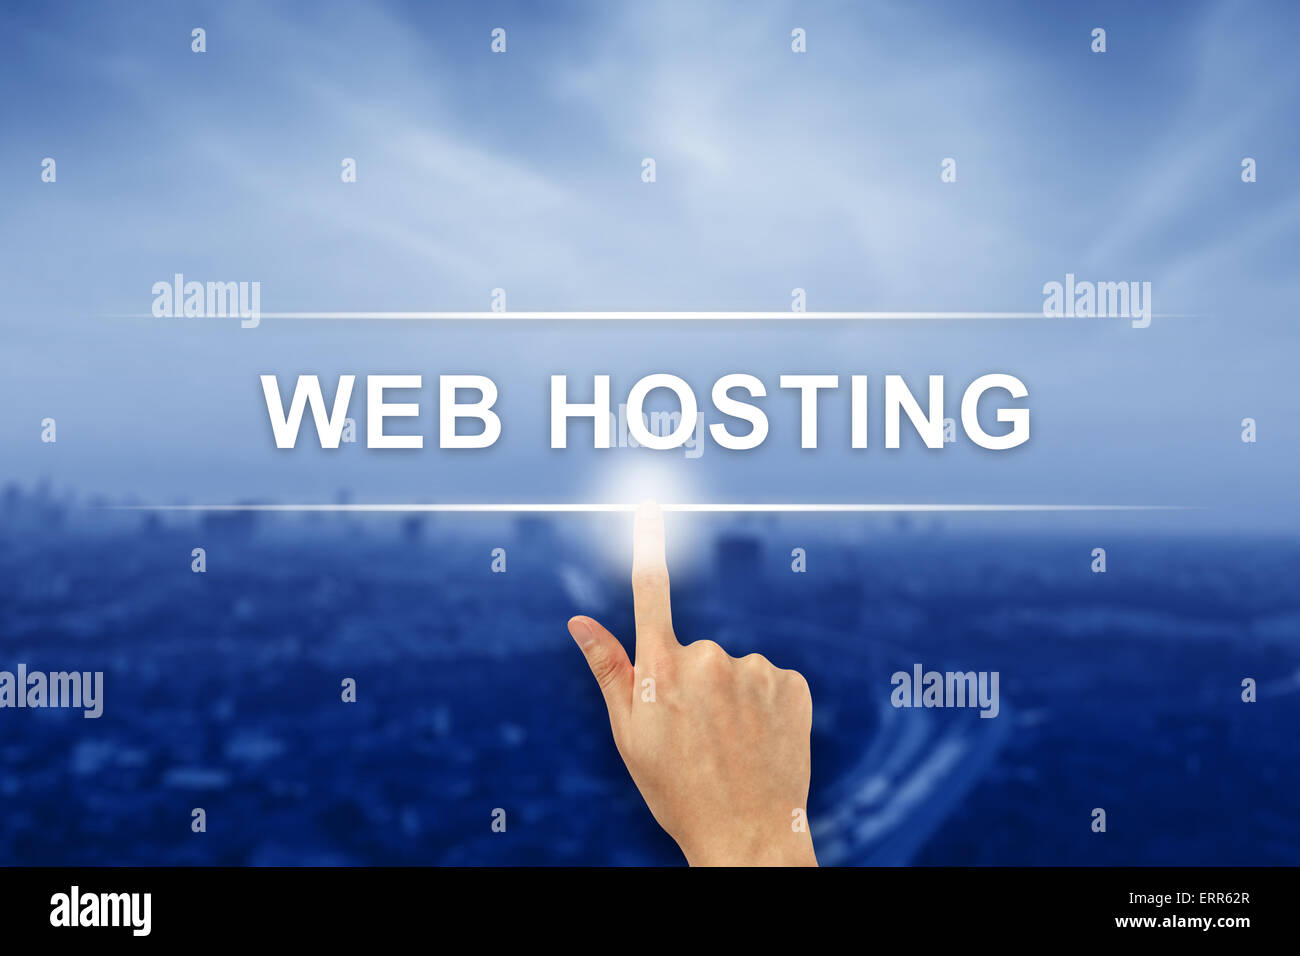 hand pushing web hosting button on a virtual screen interface Stock Photo